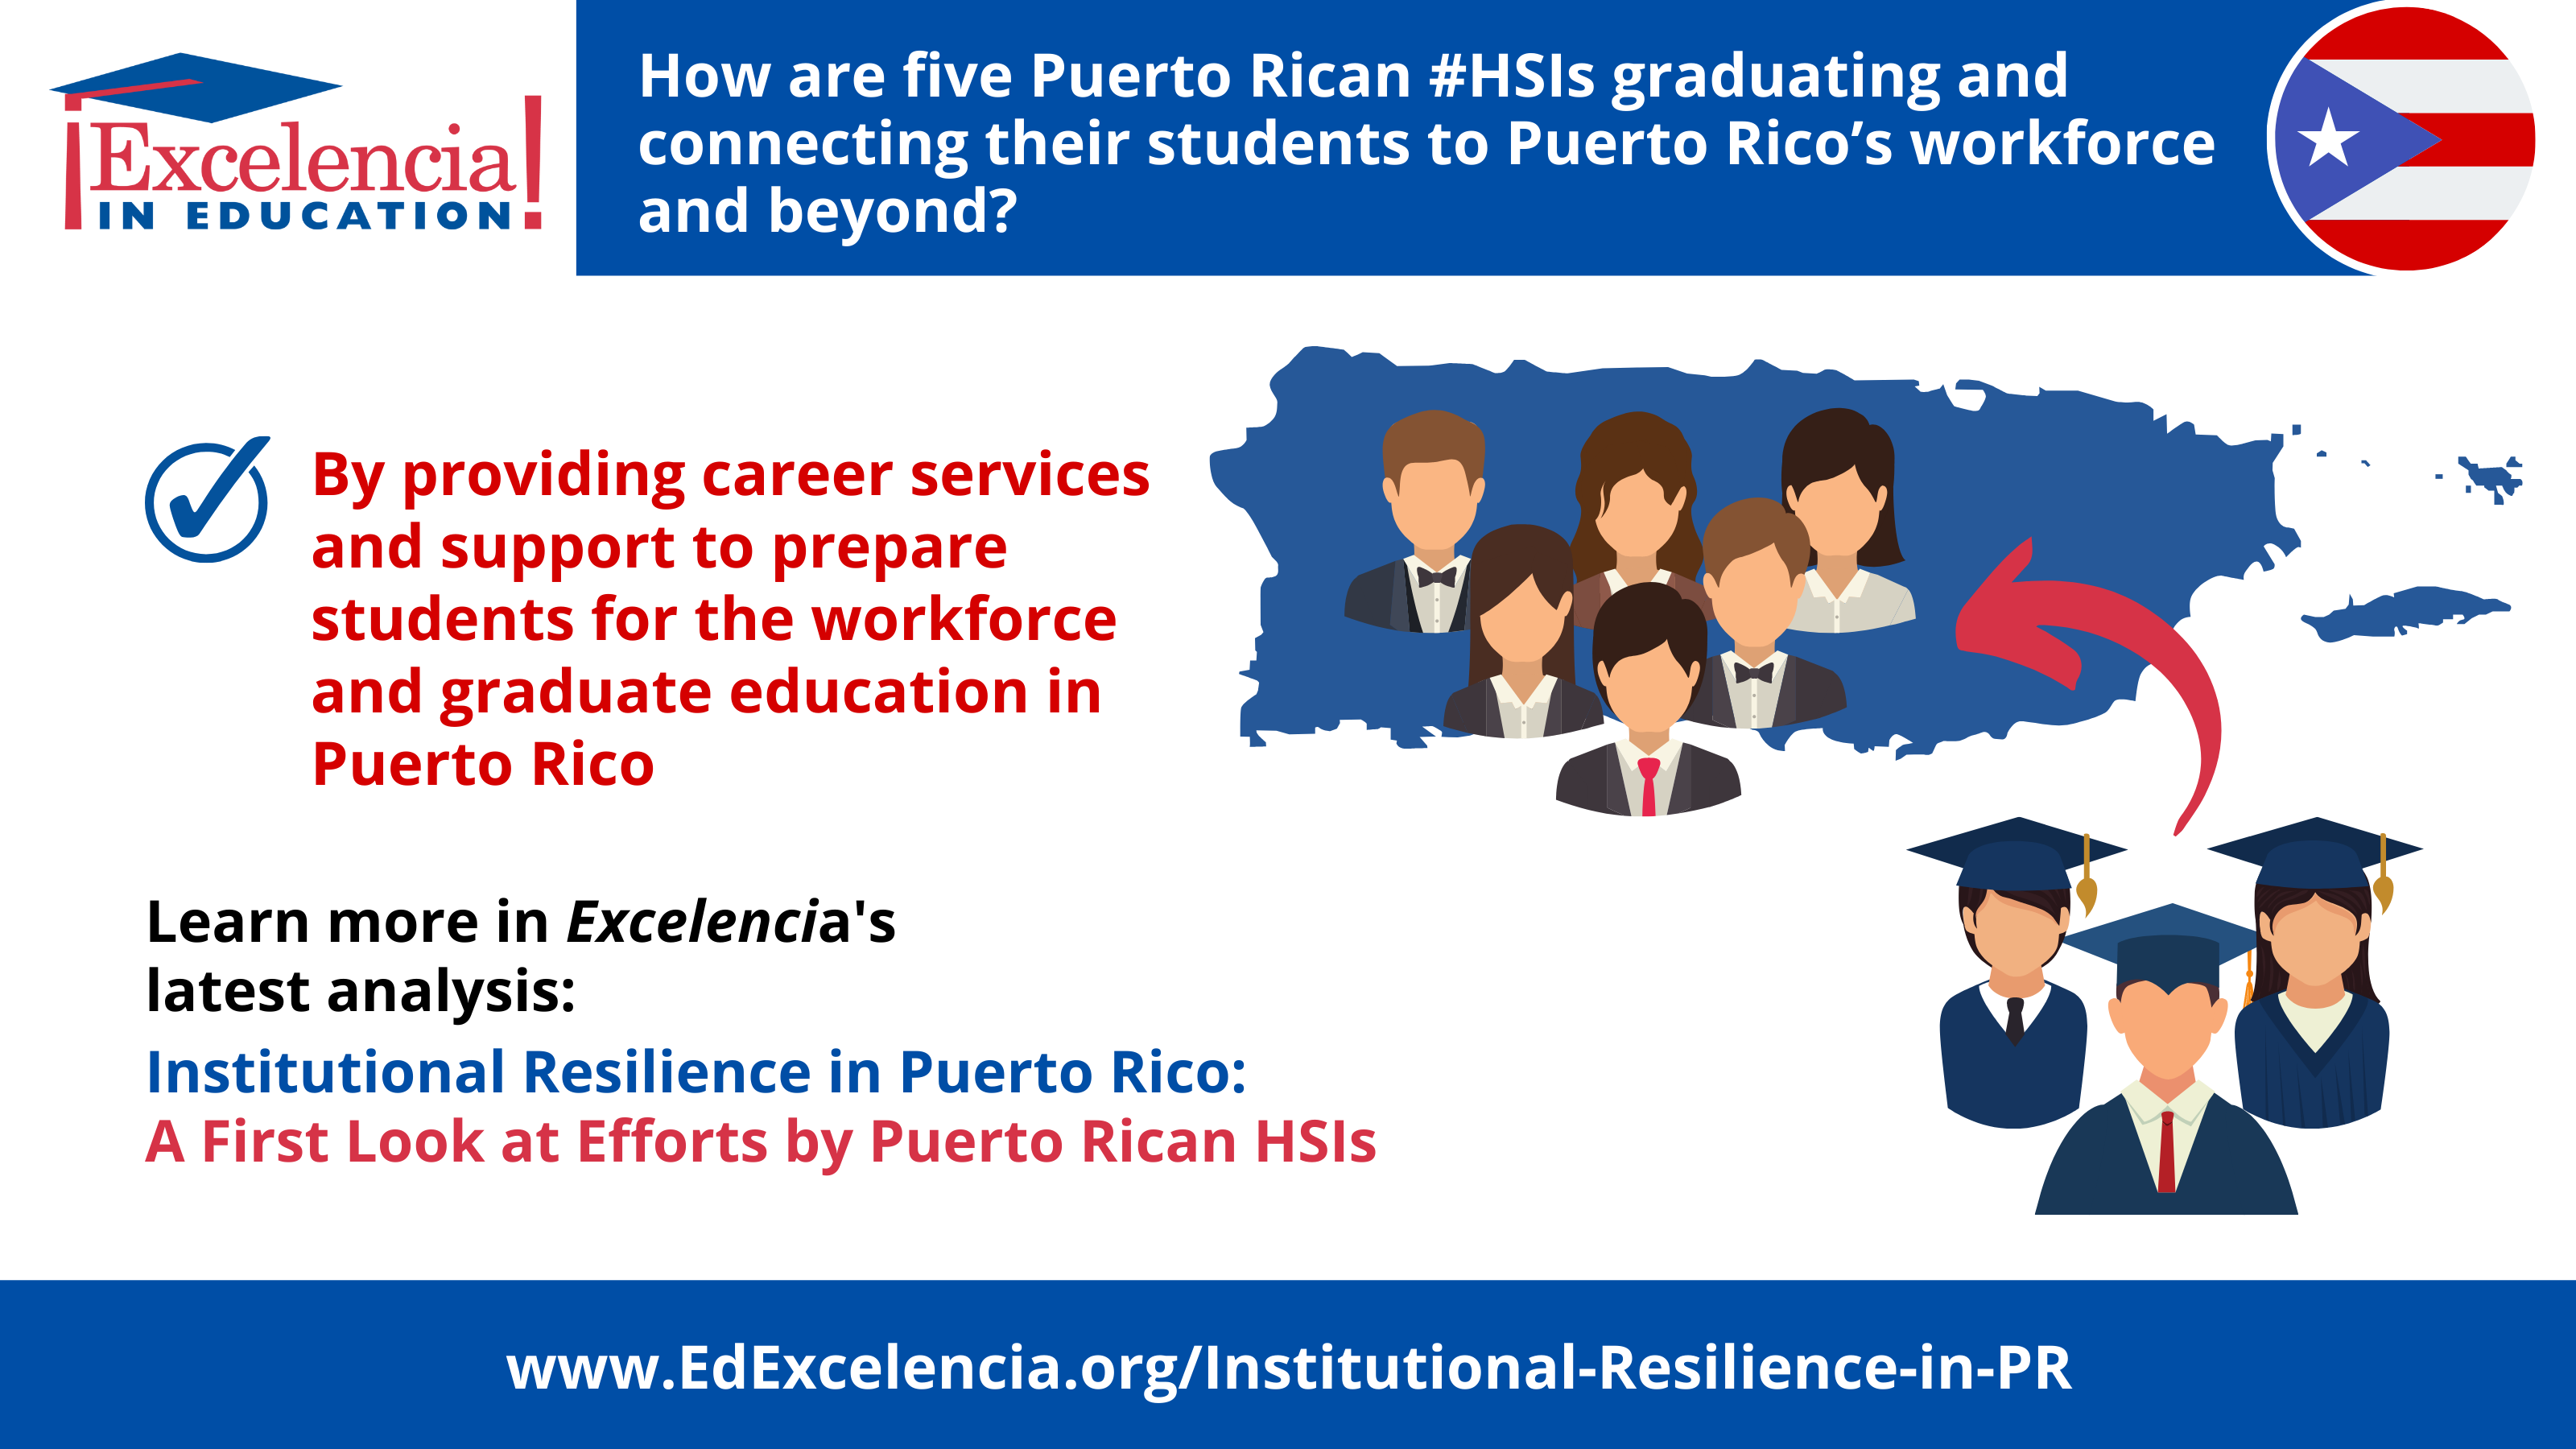 Infographic-How are five Puerto Rican #HSis graduating and connecting their students to PR's workforce and beyond?